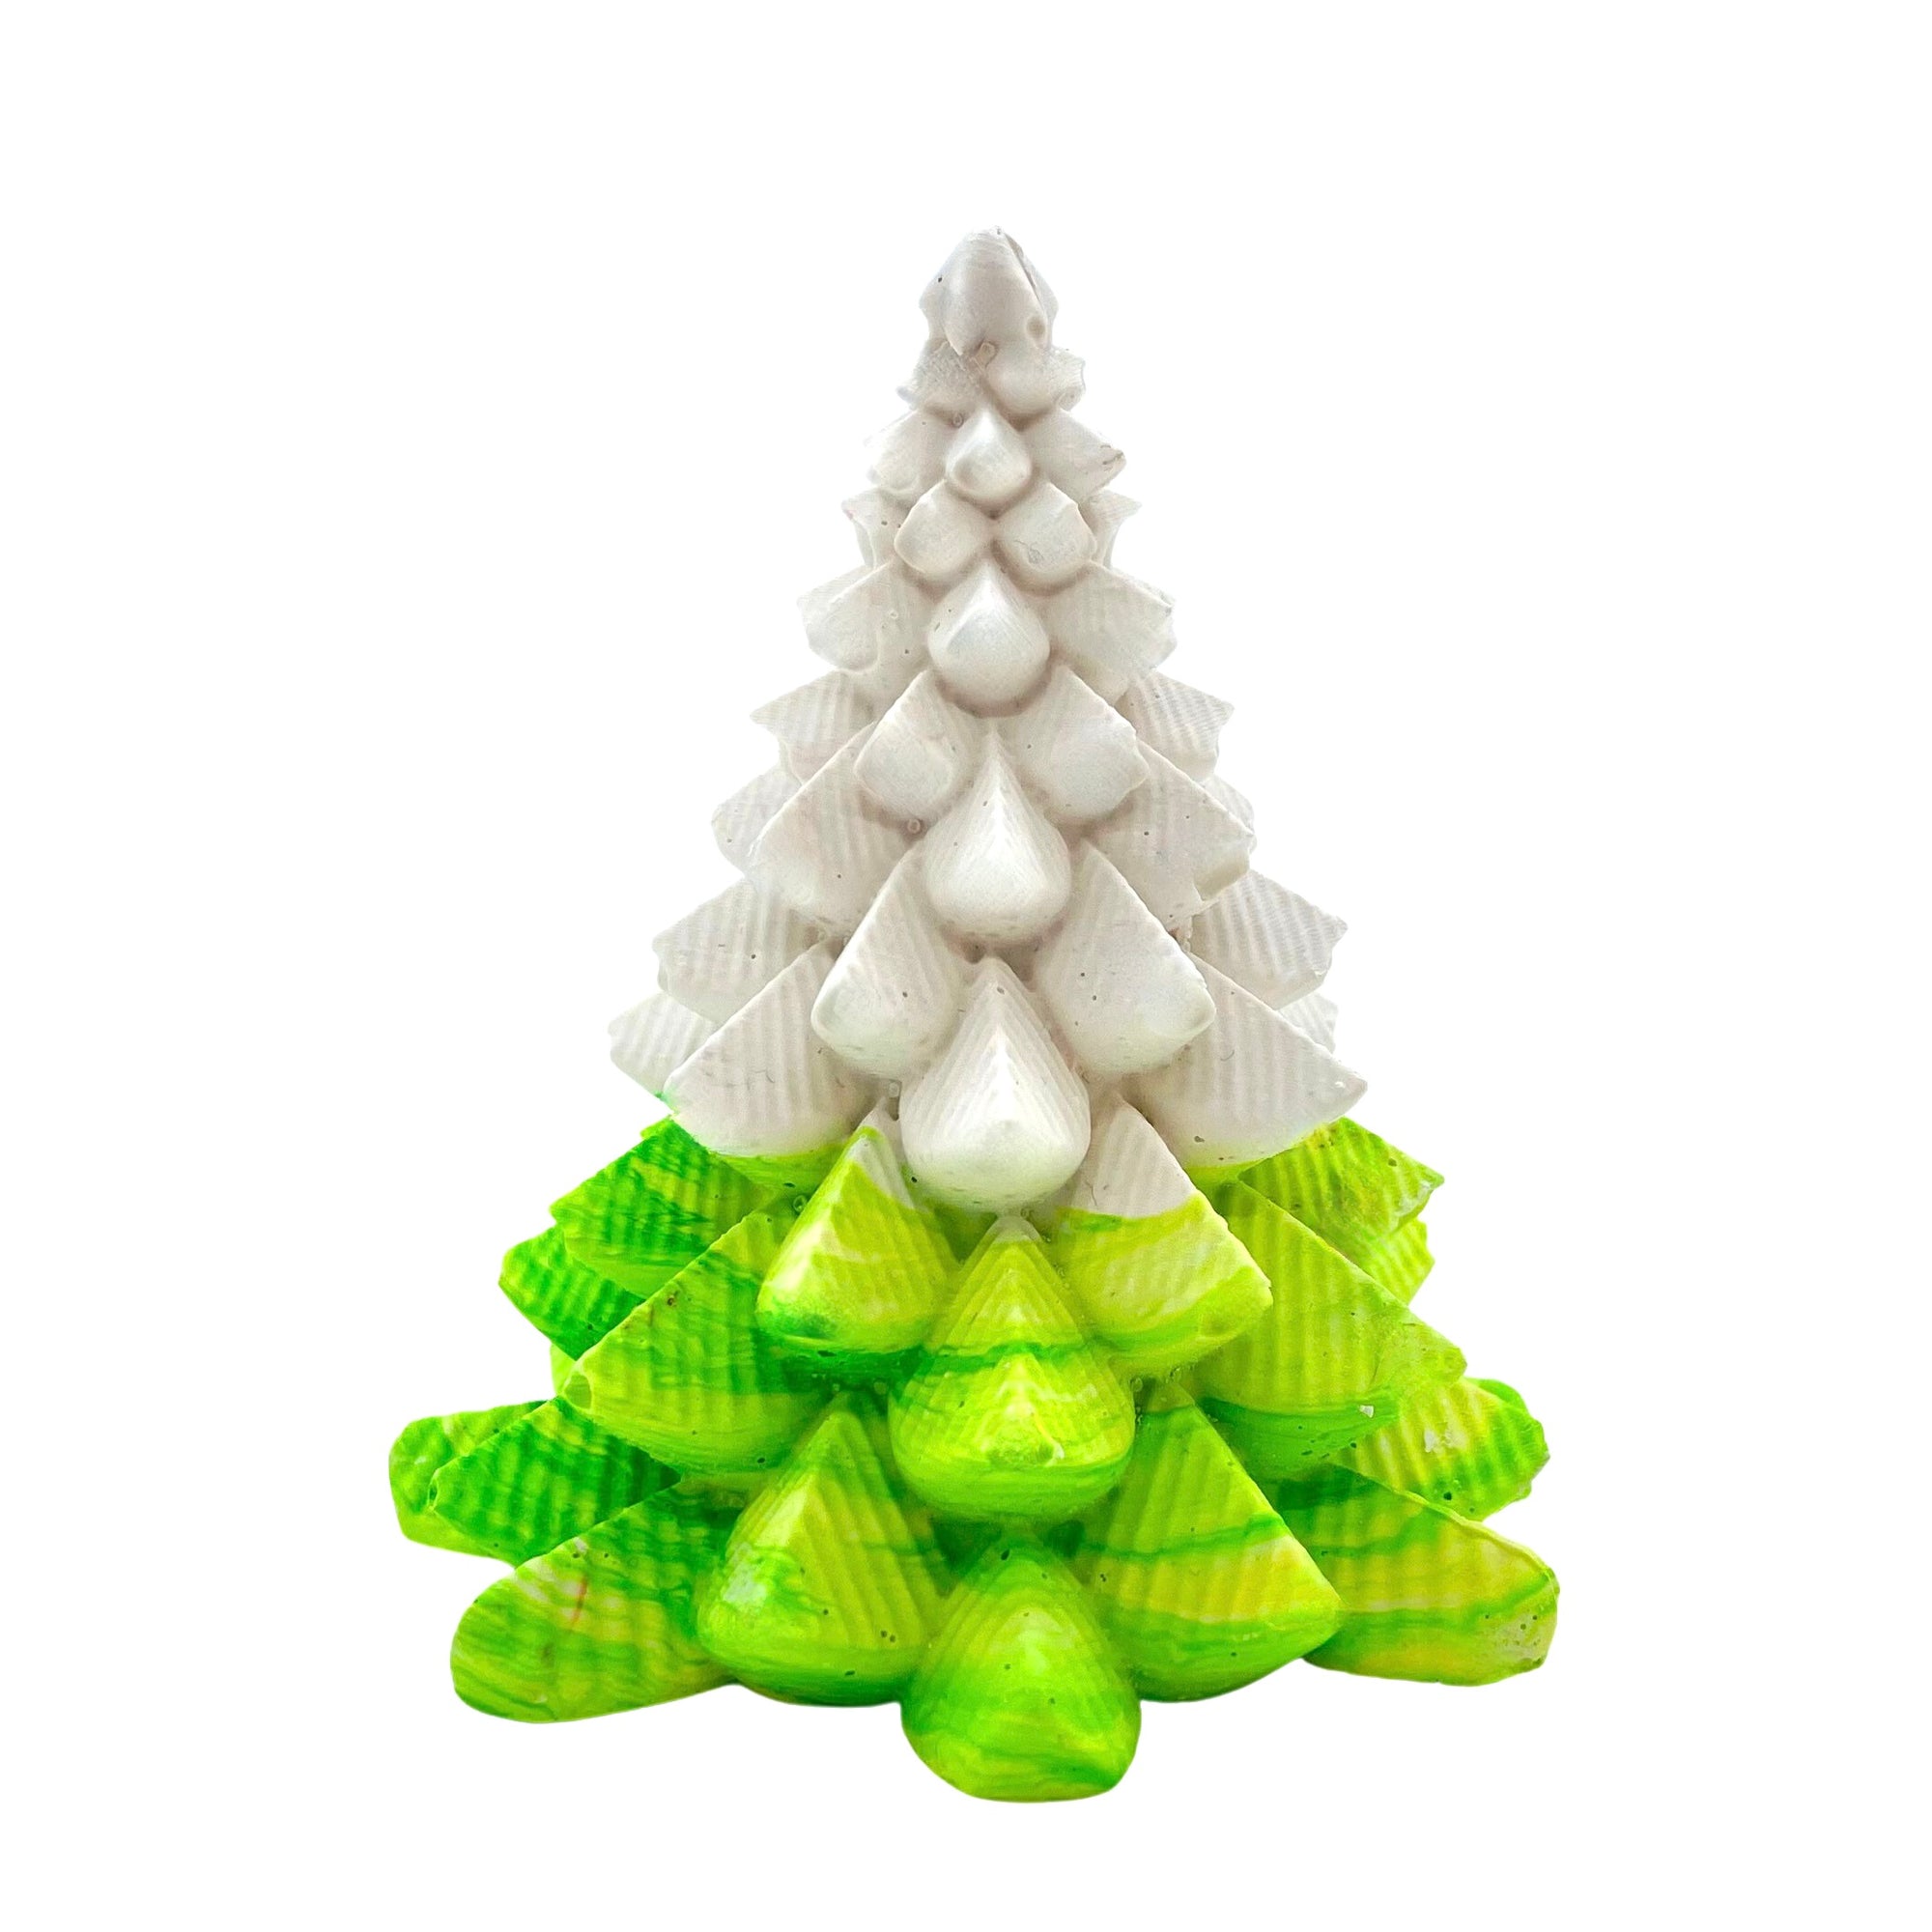 A small Jesmonite Christmas tree measuring 8.5cm tall and 7.5cm wide marbled with lime and white pigment.